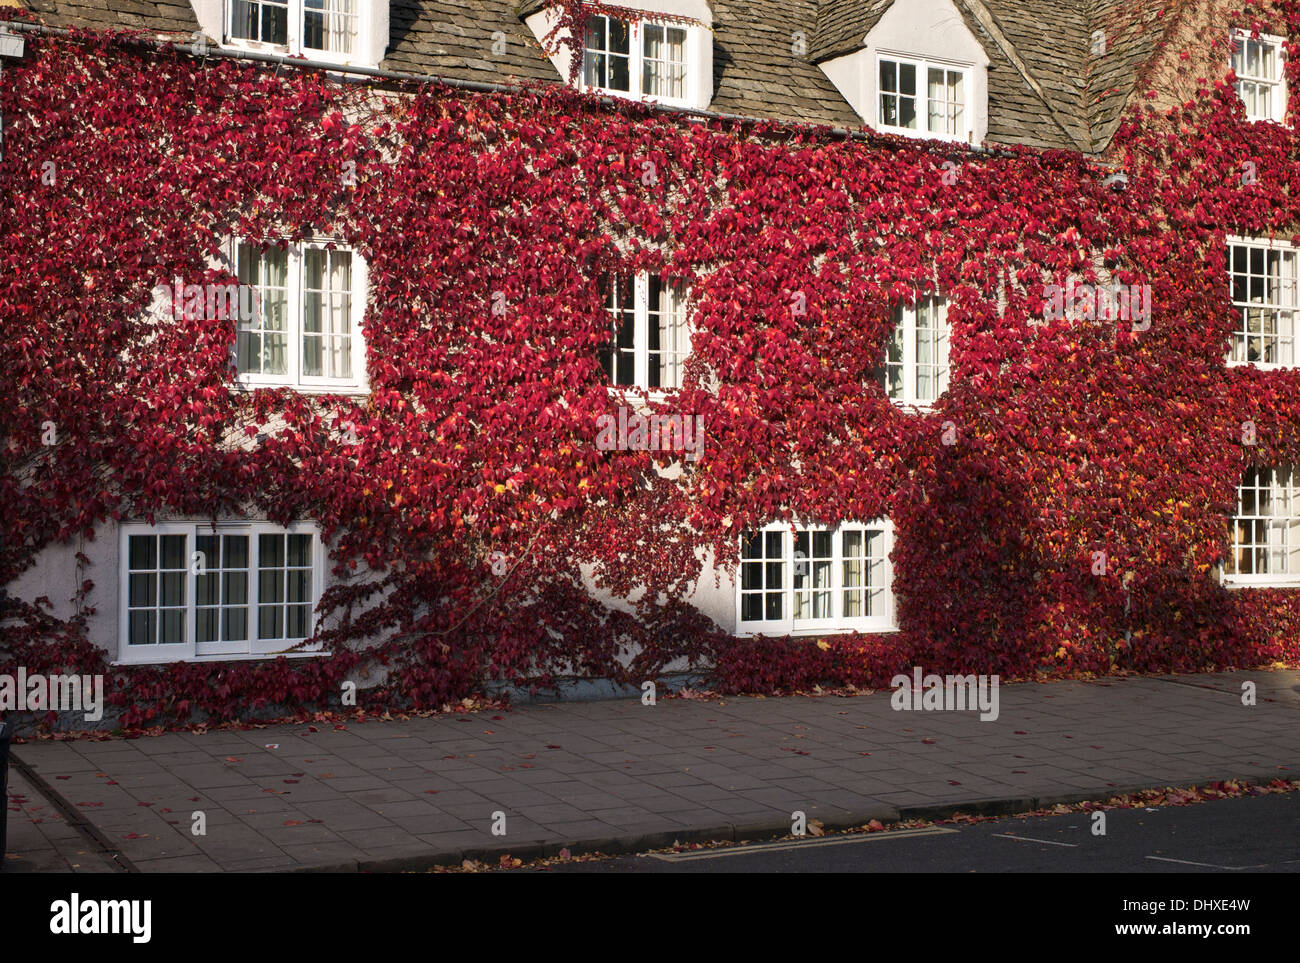 Friday 15th November 2013, Oxford Oxfordshire, UK. Building covered with crimson red autumnal leaves. Stock Photo